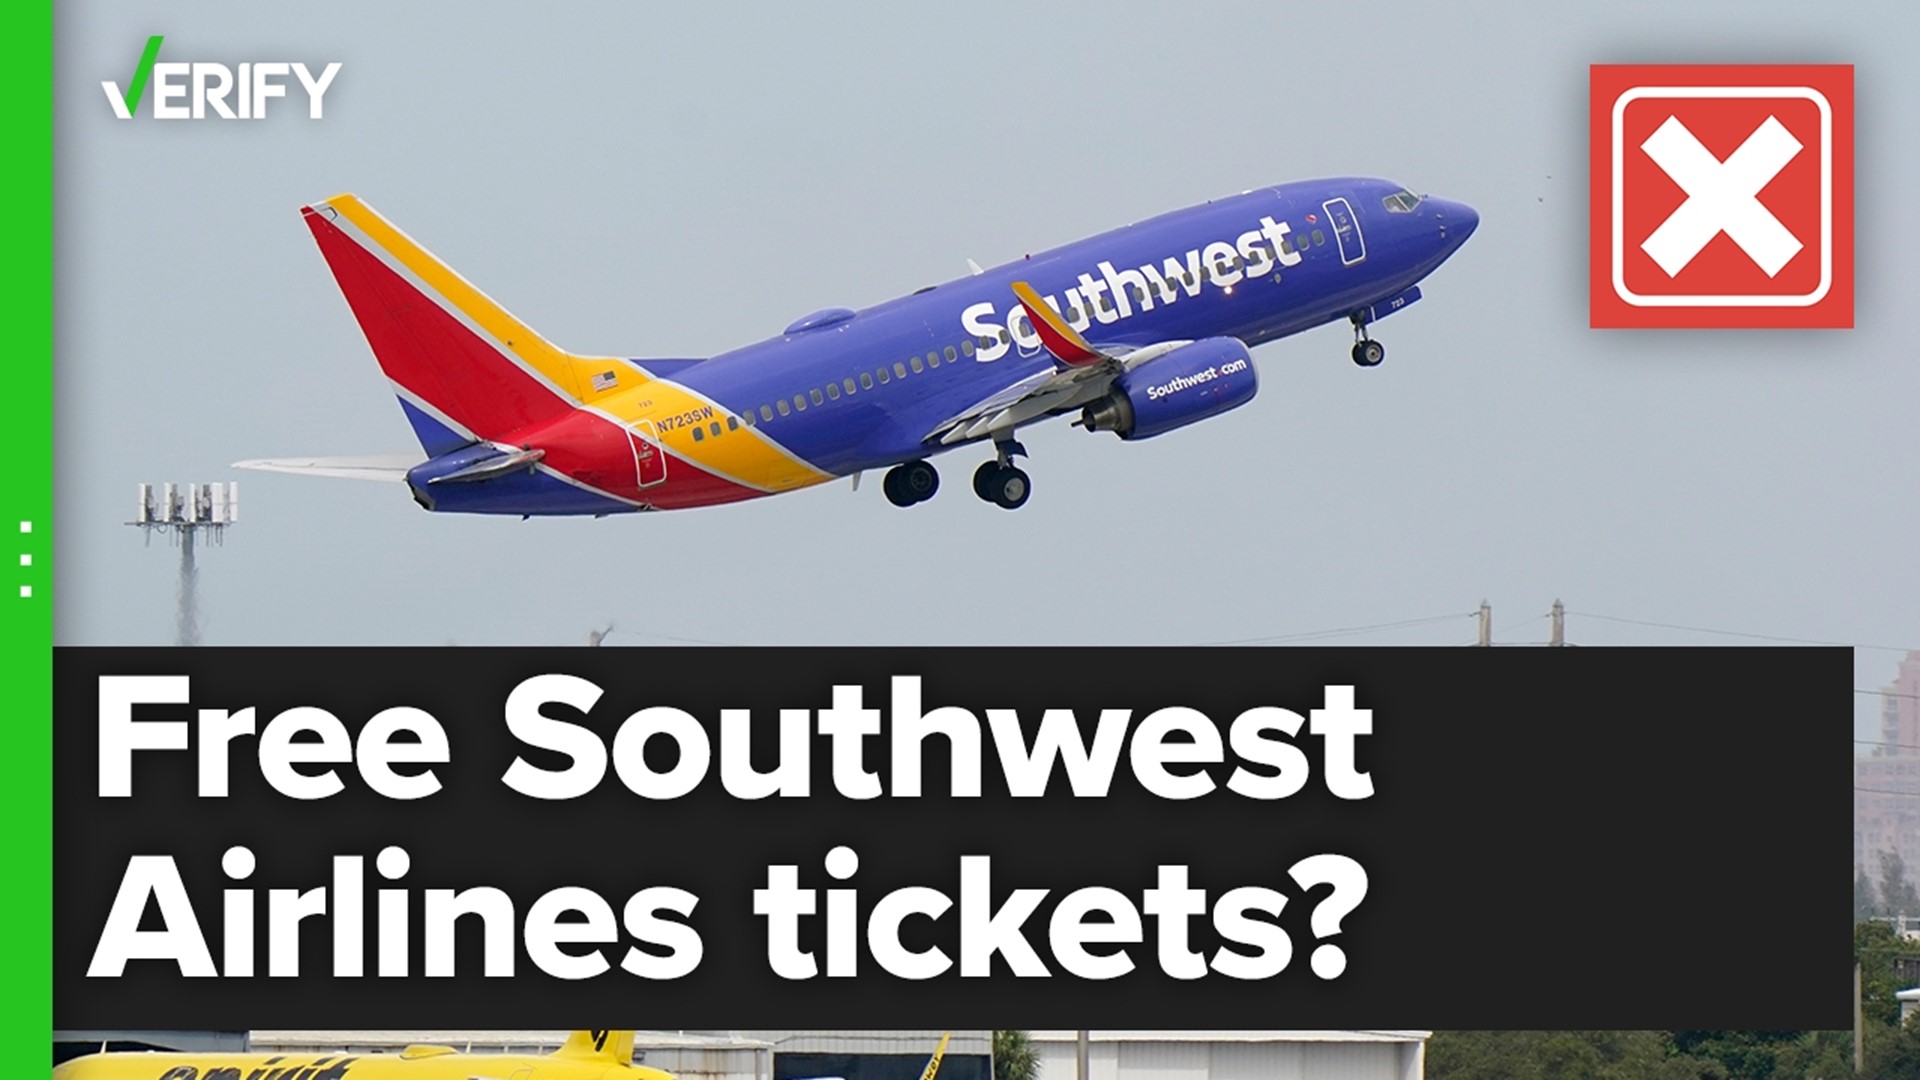 The post promising free plane tickets from Southwest Airlines is a classic example of a social media giveaway scam called “like-farming.”